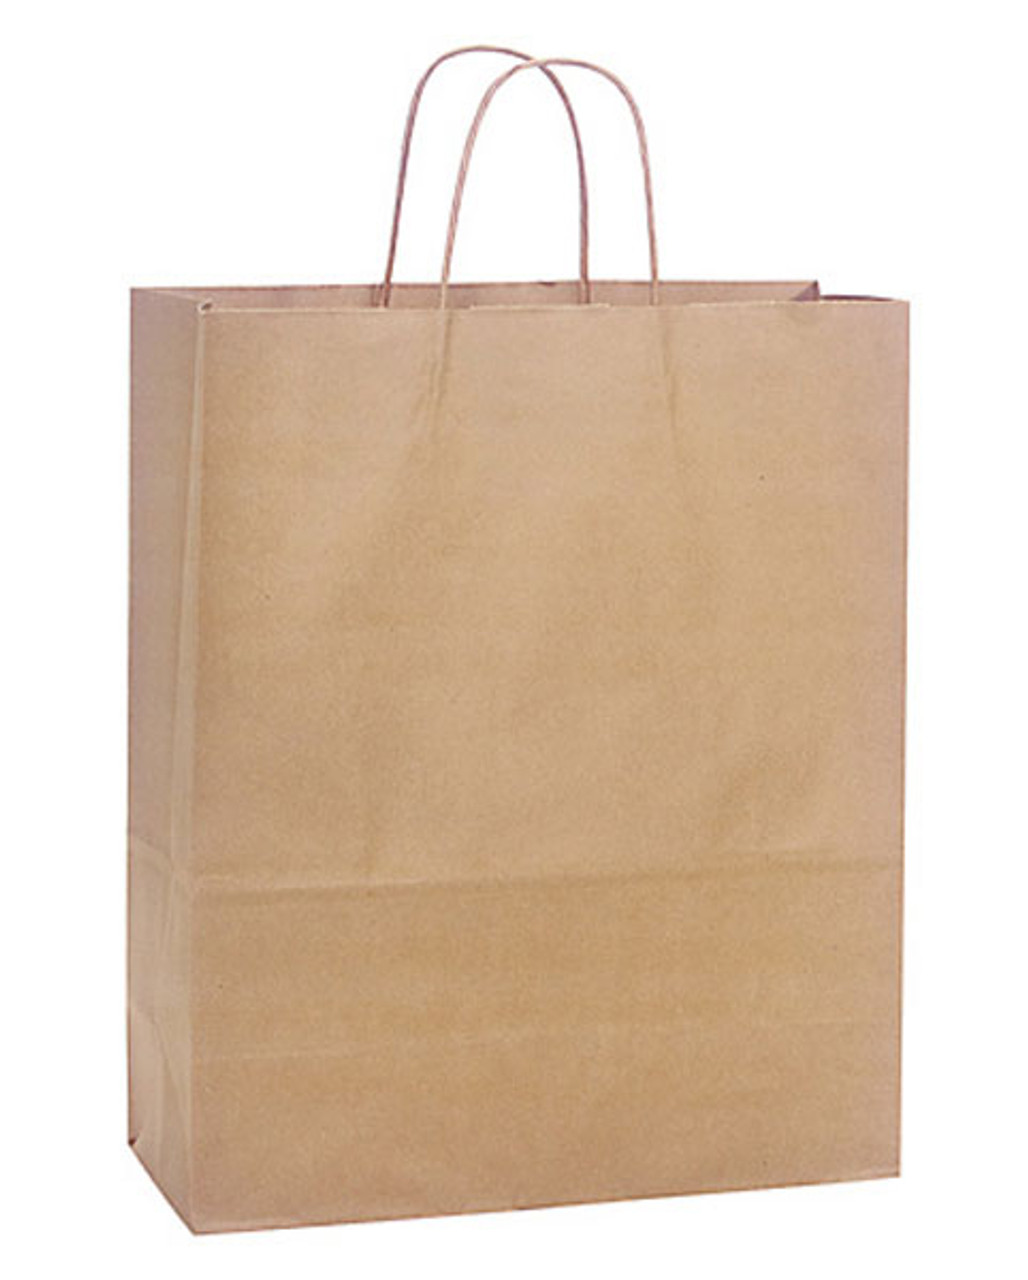 Celebrity 13"x6"x15" 100% Recycled Kraft Paper Shopping Bags